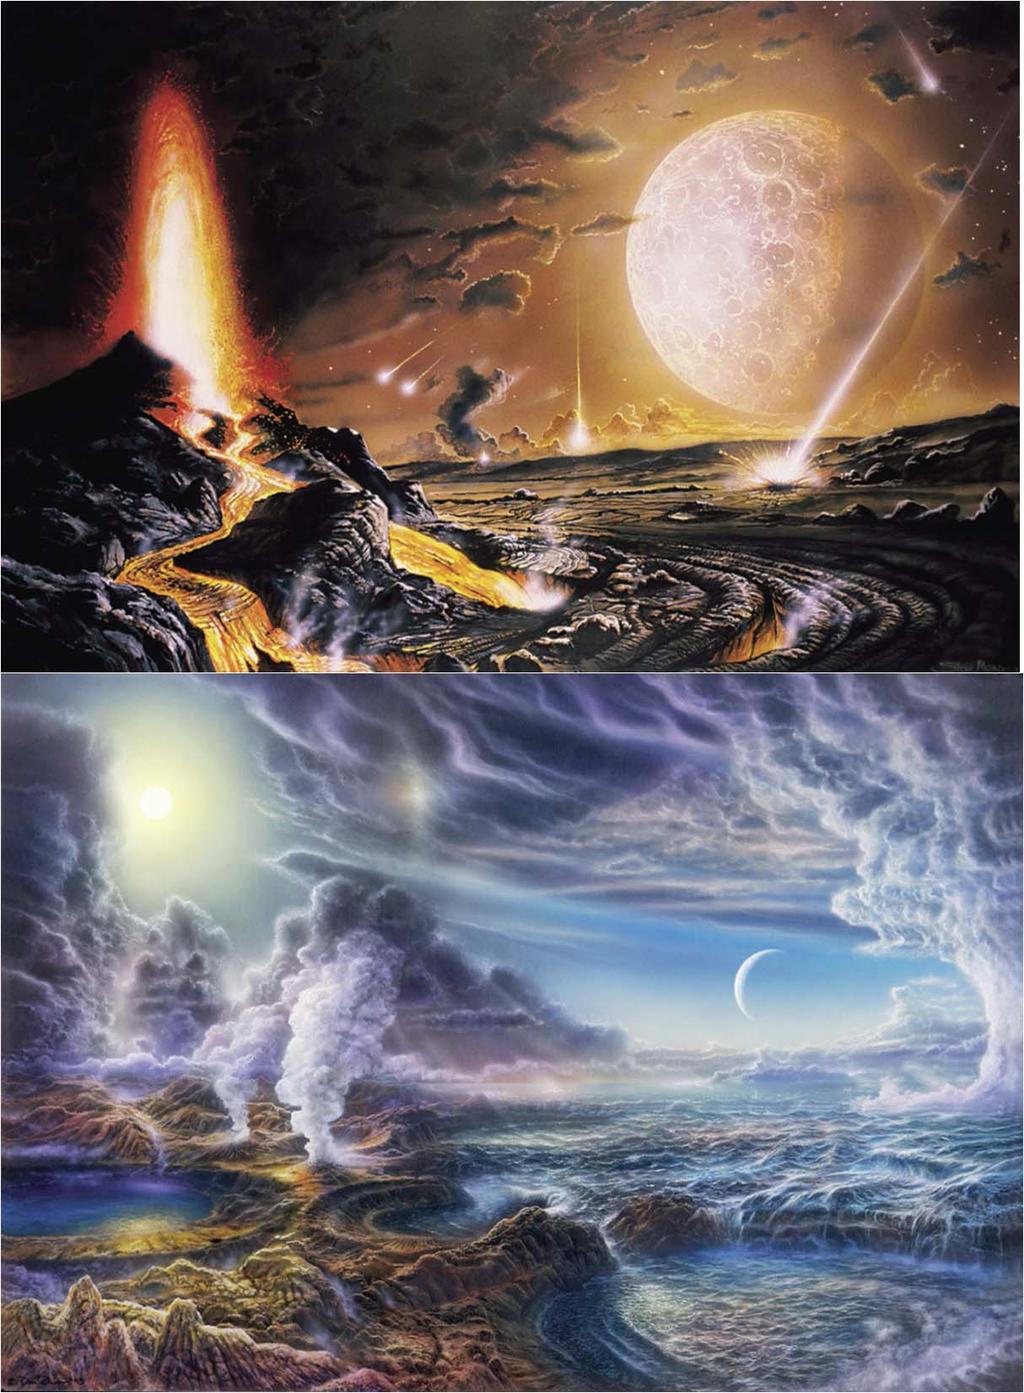 This figure combines two views of the Hadean landscape: the first is one of those wonderful artist s impressions of fiery volcanoes, frequent meteorite impacts and a looming